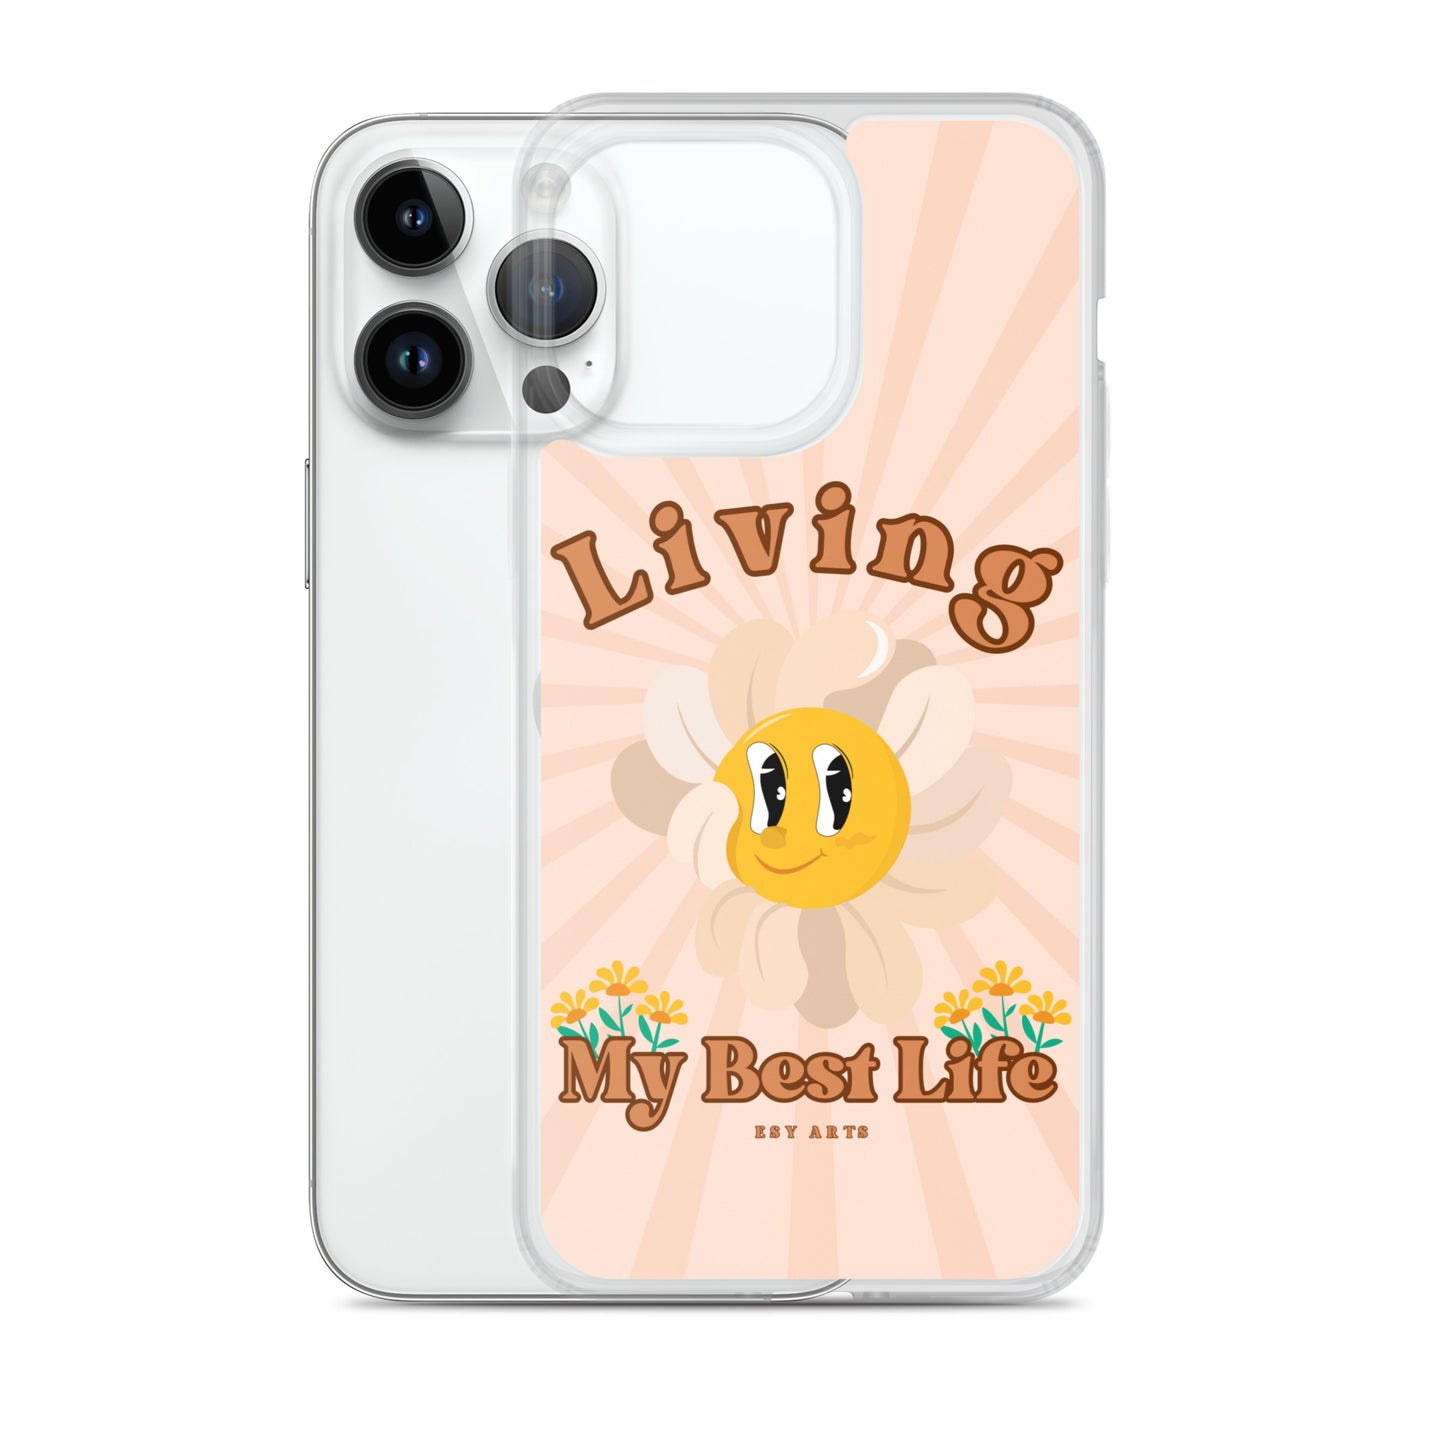 Living My Best Life - iPhone Case